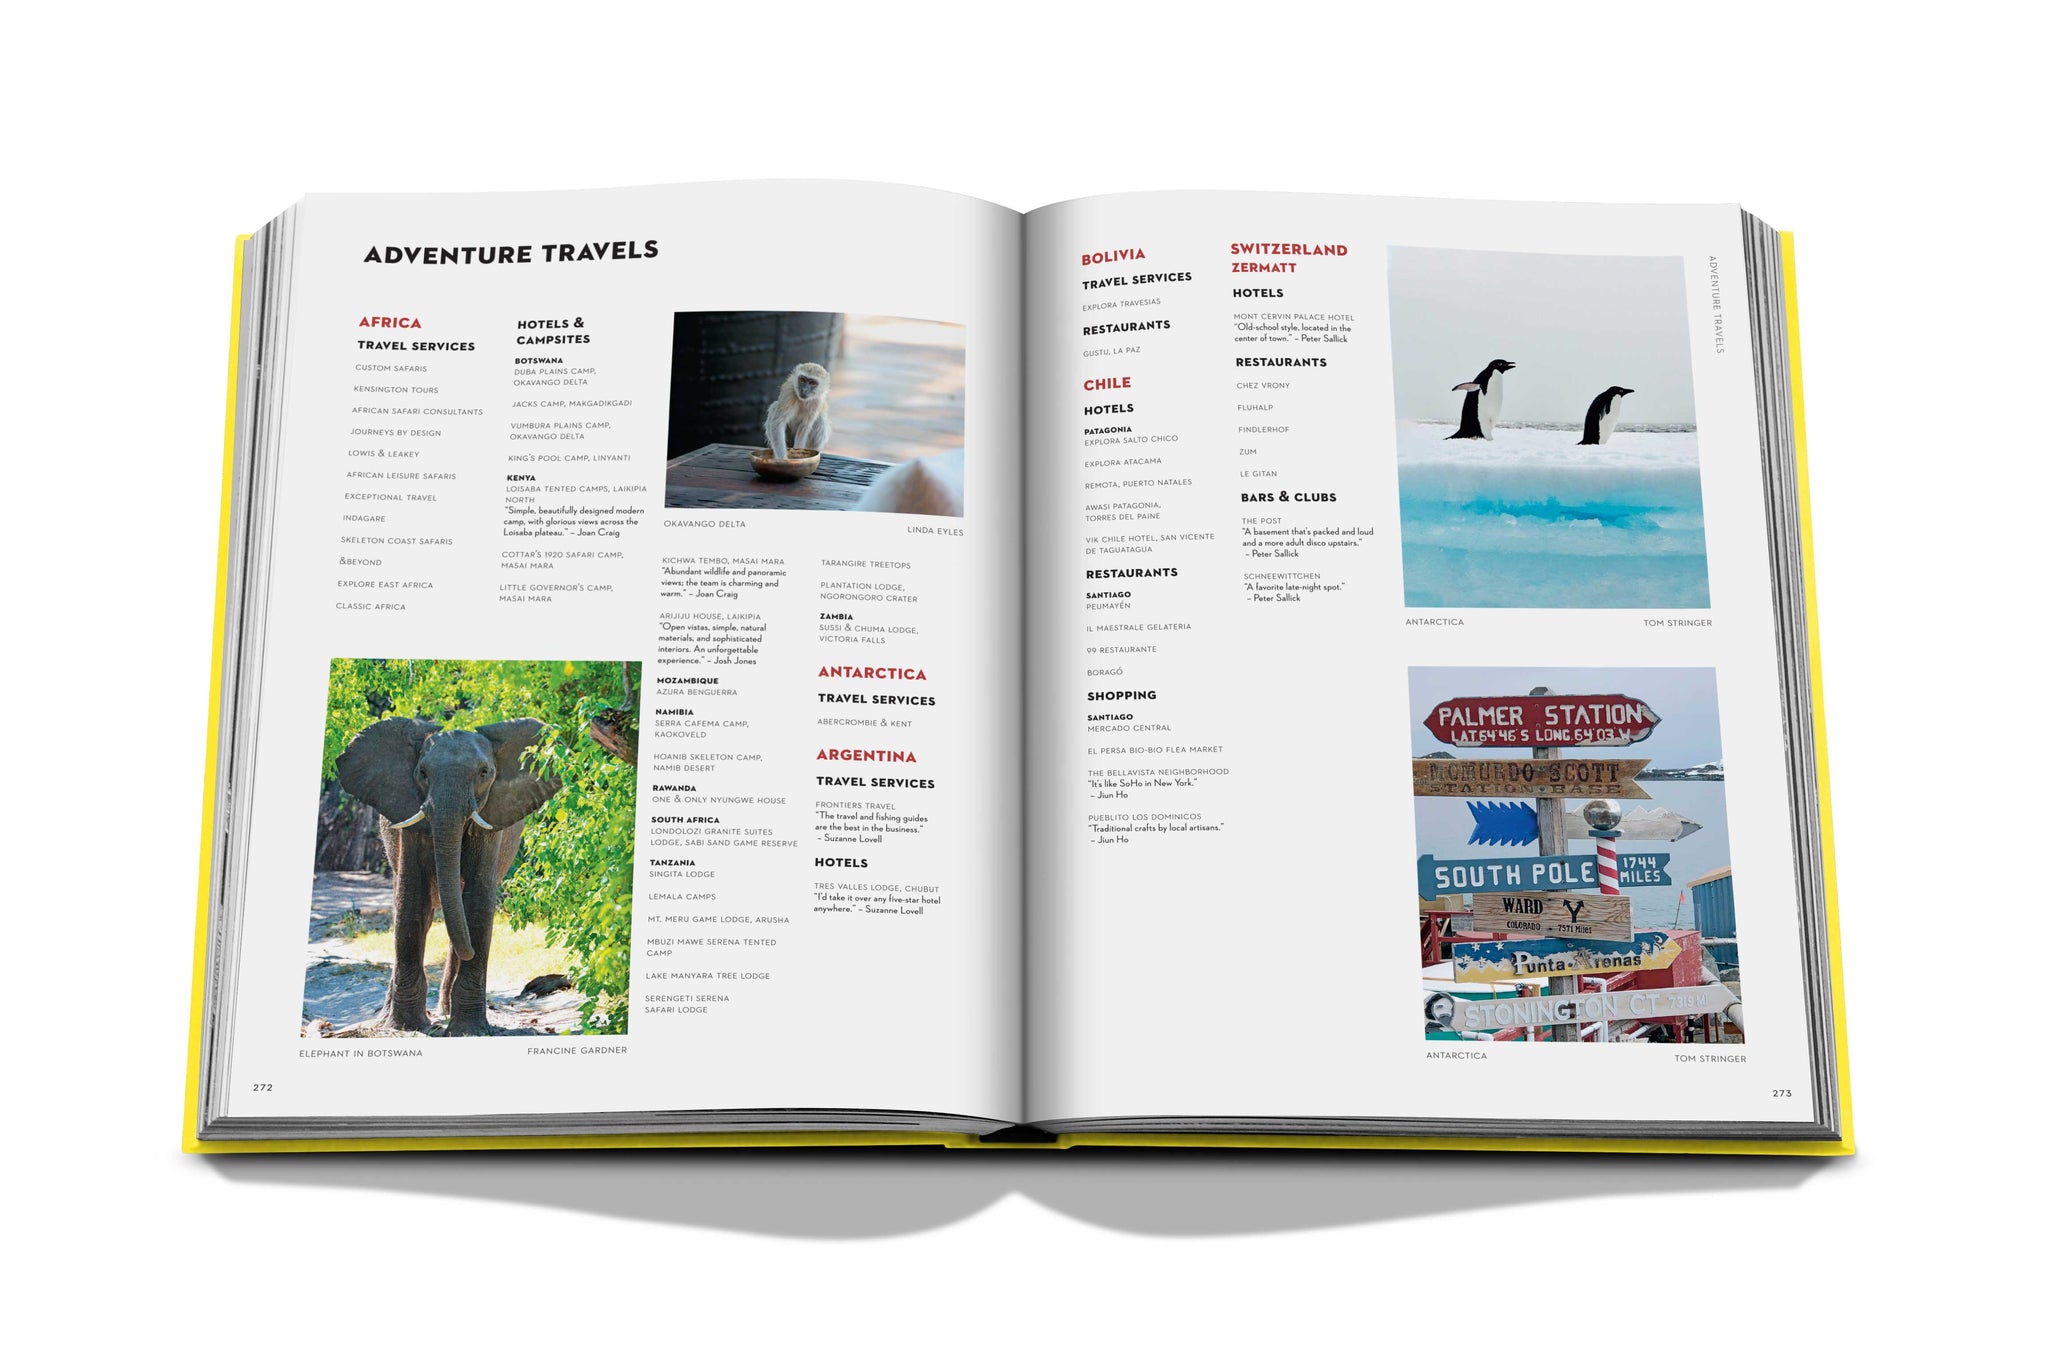 ASSOULINE Travel by Design Hardcover Book by The Design Leadership Network